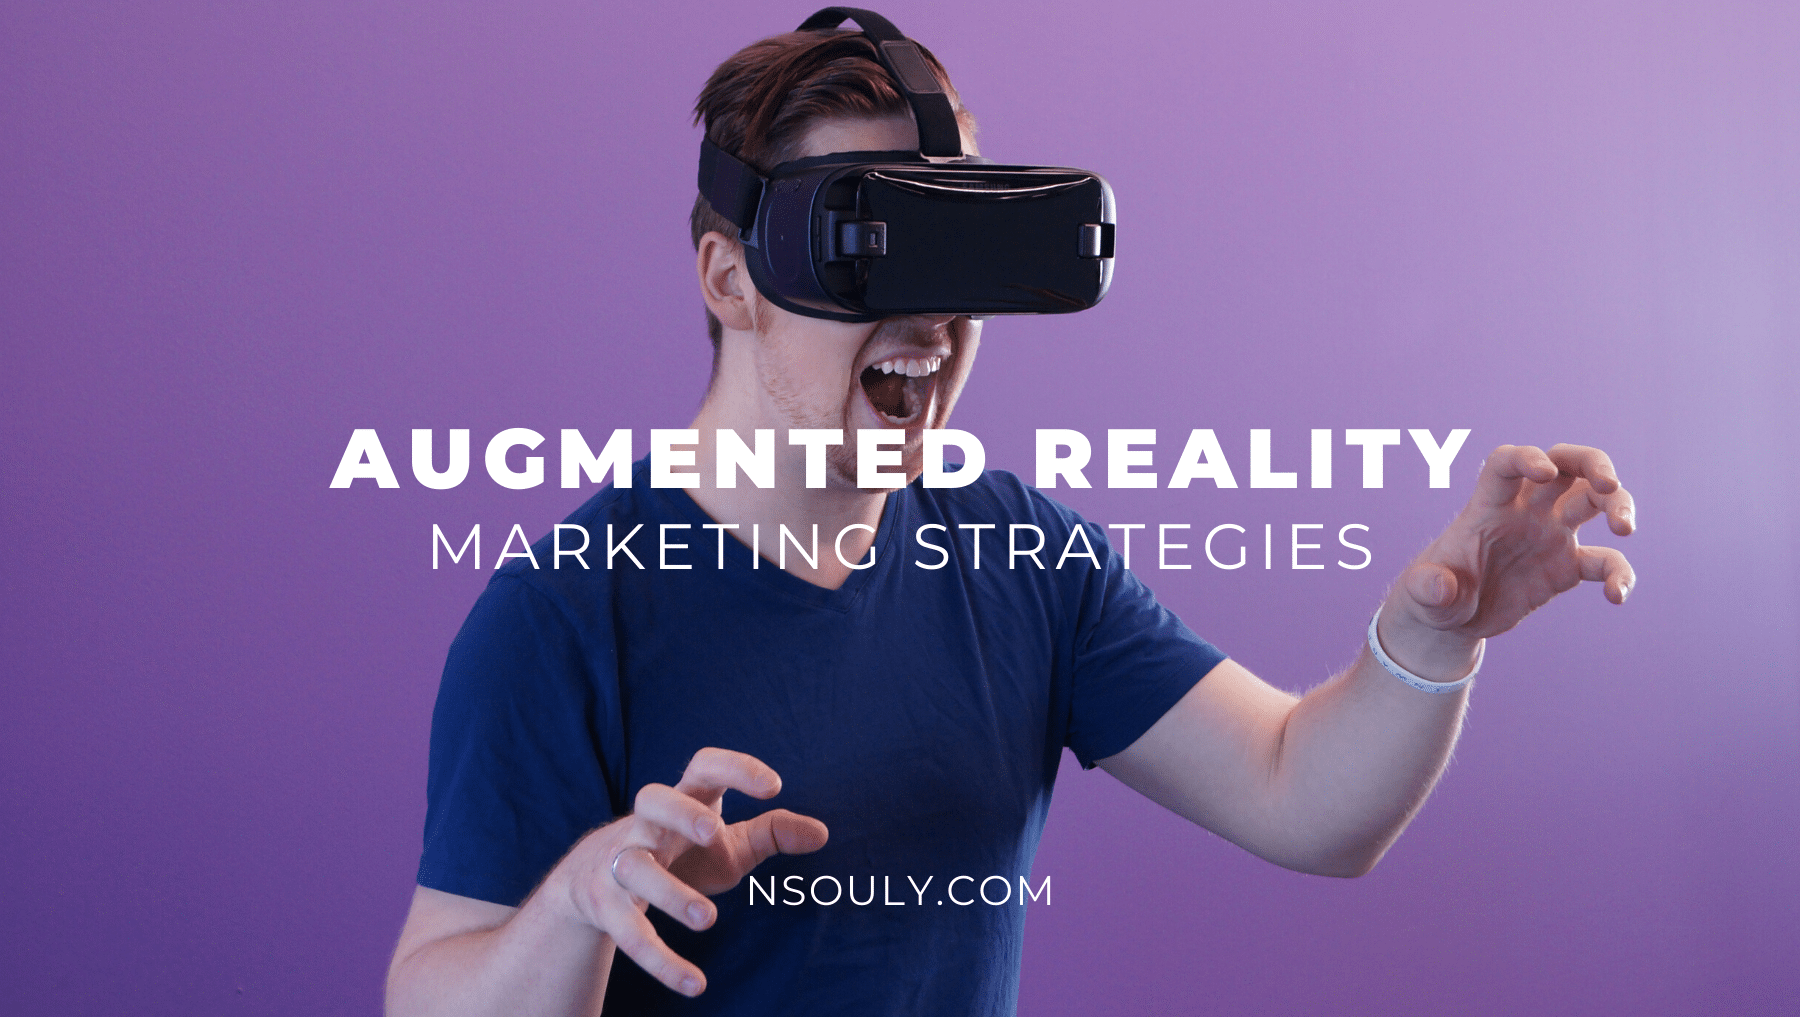 How to Use Augmented Reality Marketing Strategies to Boost Your Brand